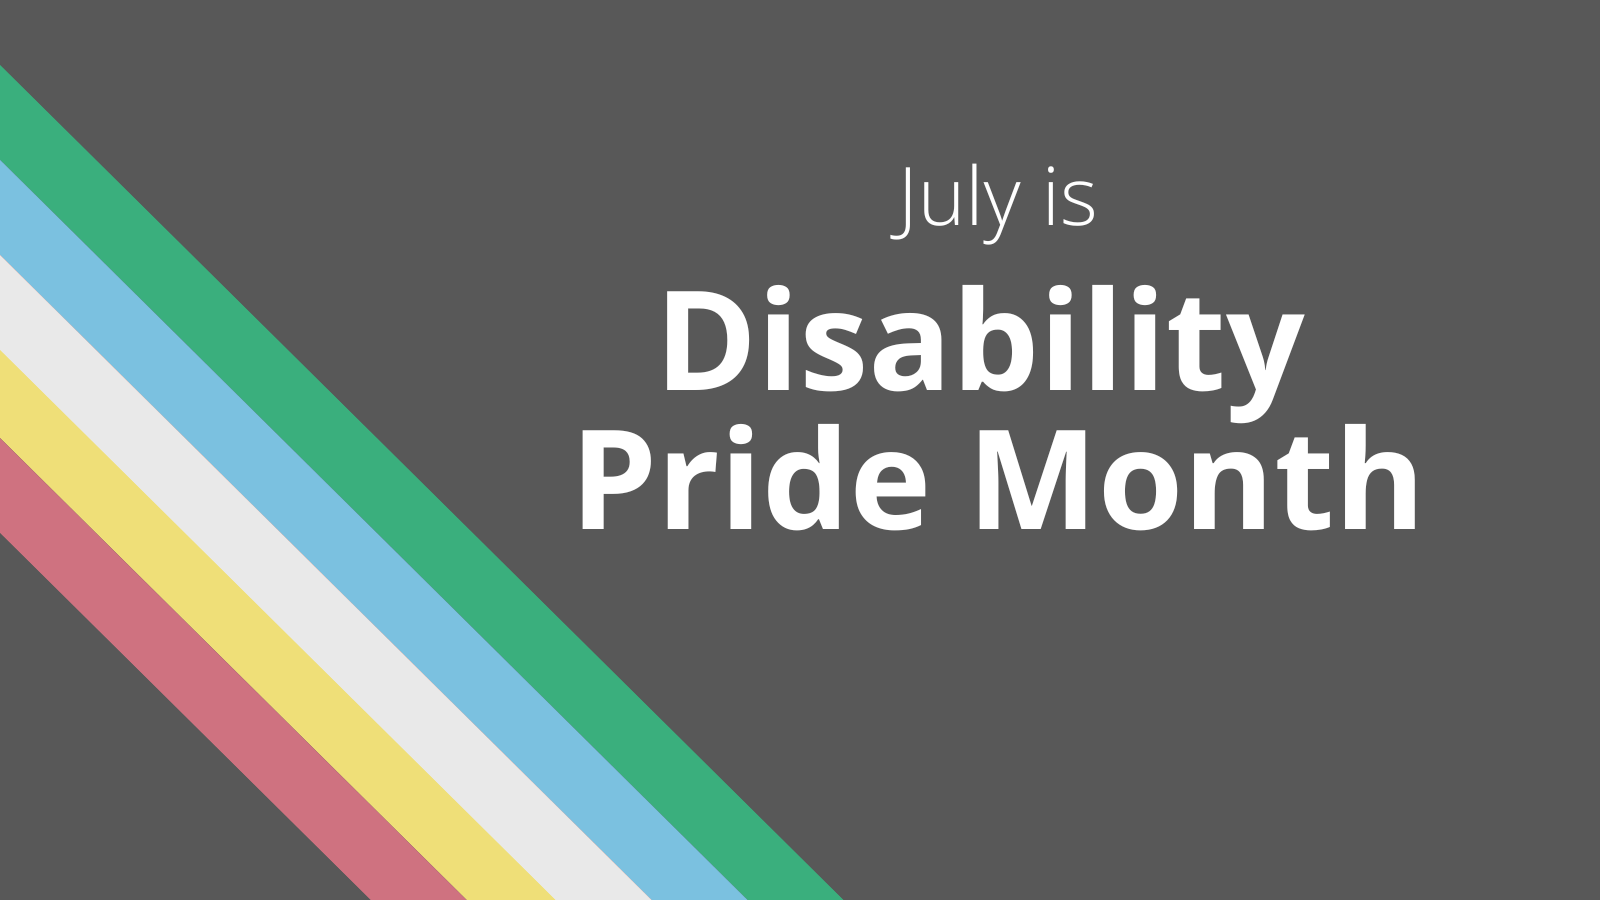 Disability pride month with disability pride flag colors